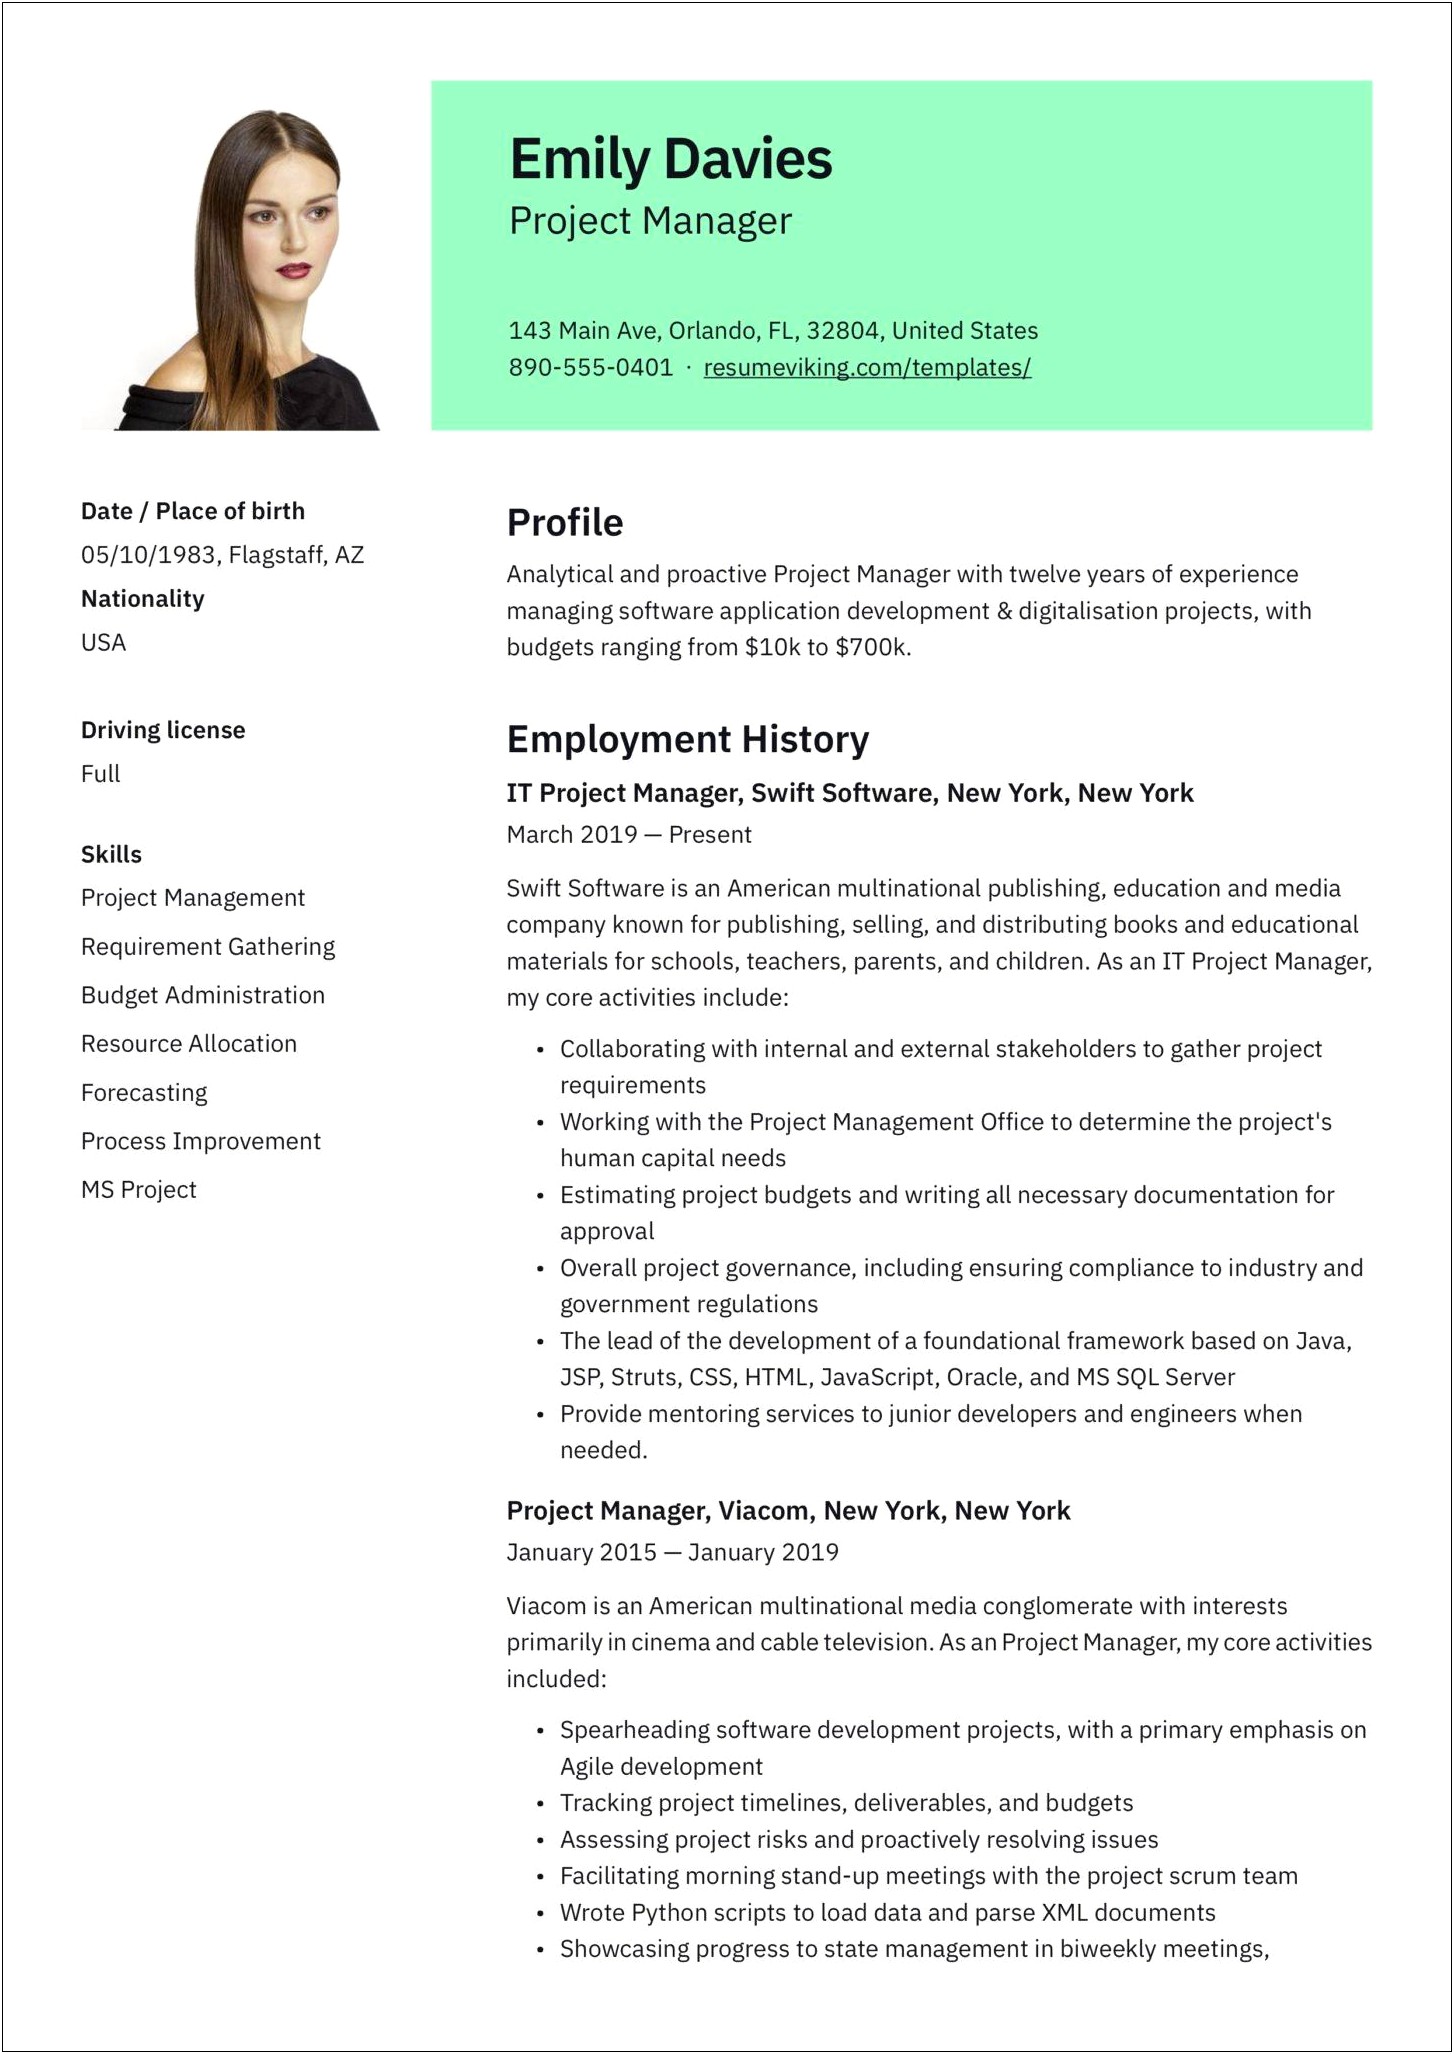 It Project Manager Resume Template Download